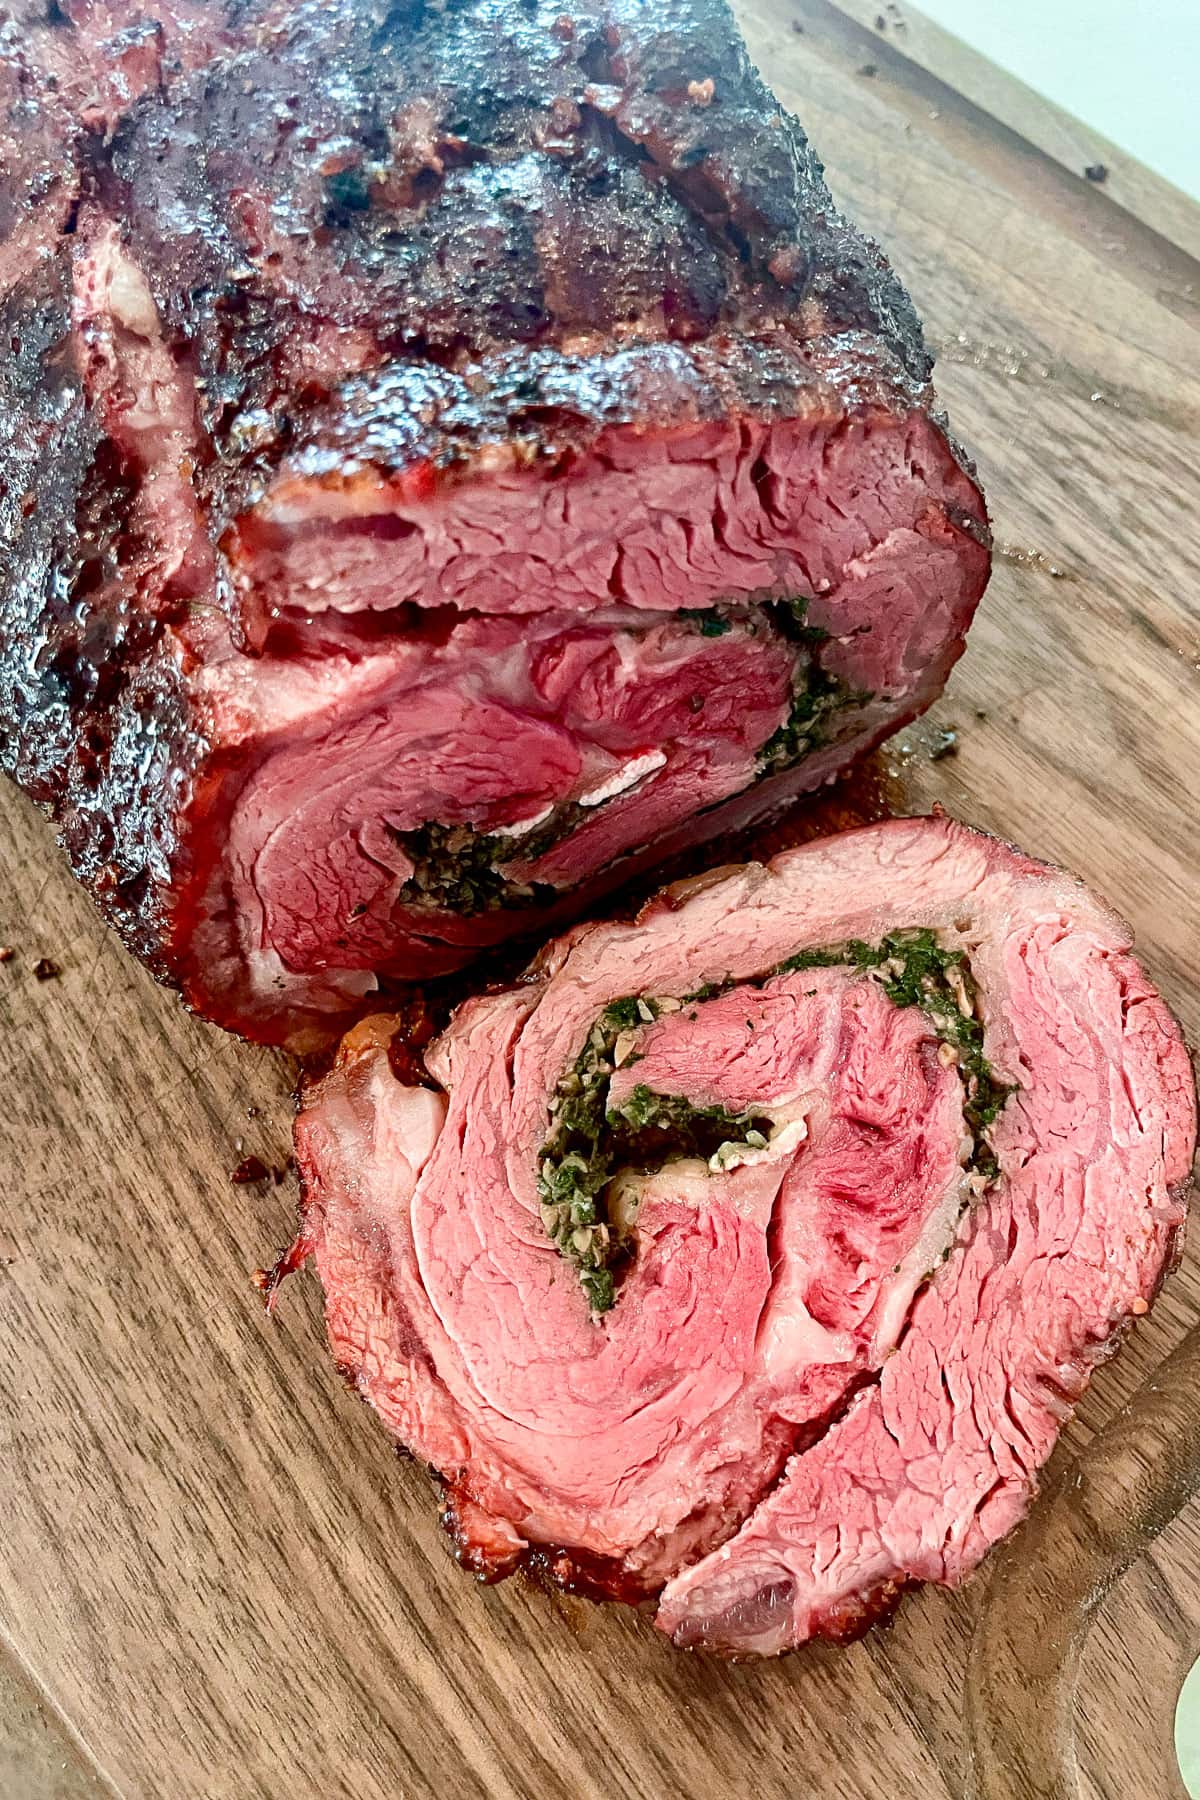 A rollled Spencer steak that is stuffed with spinich and cheese and smoked on the bbq